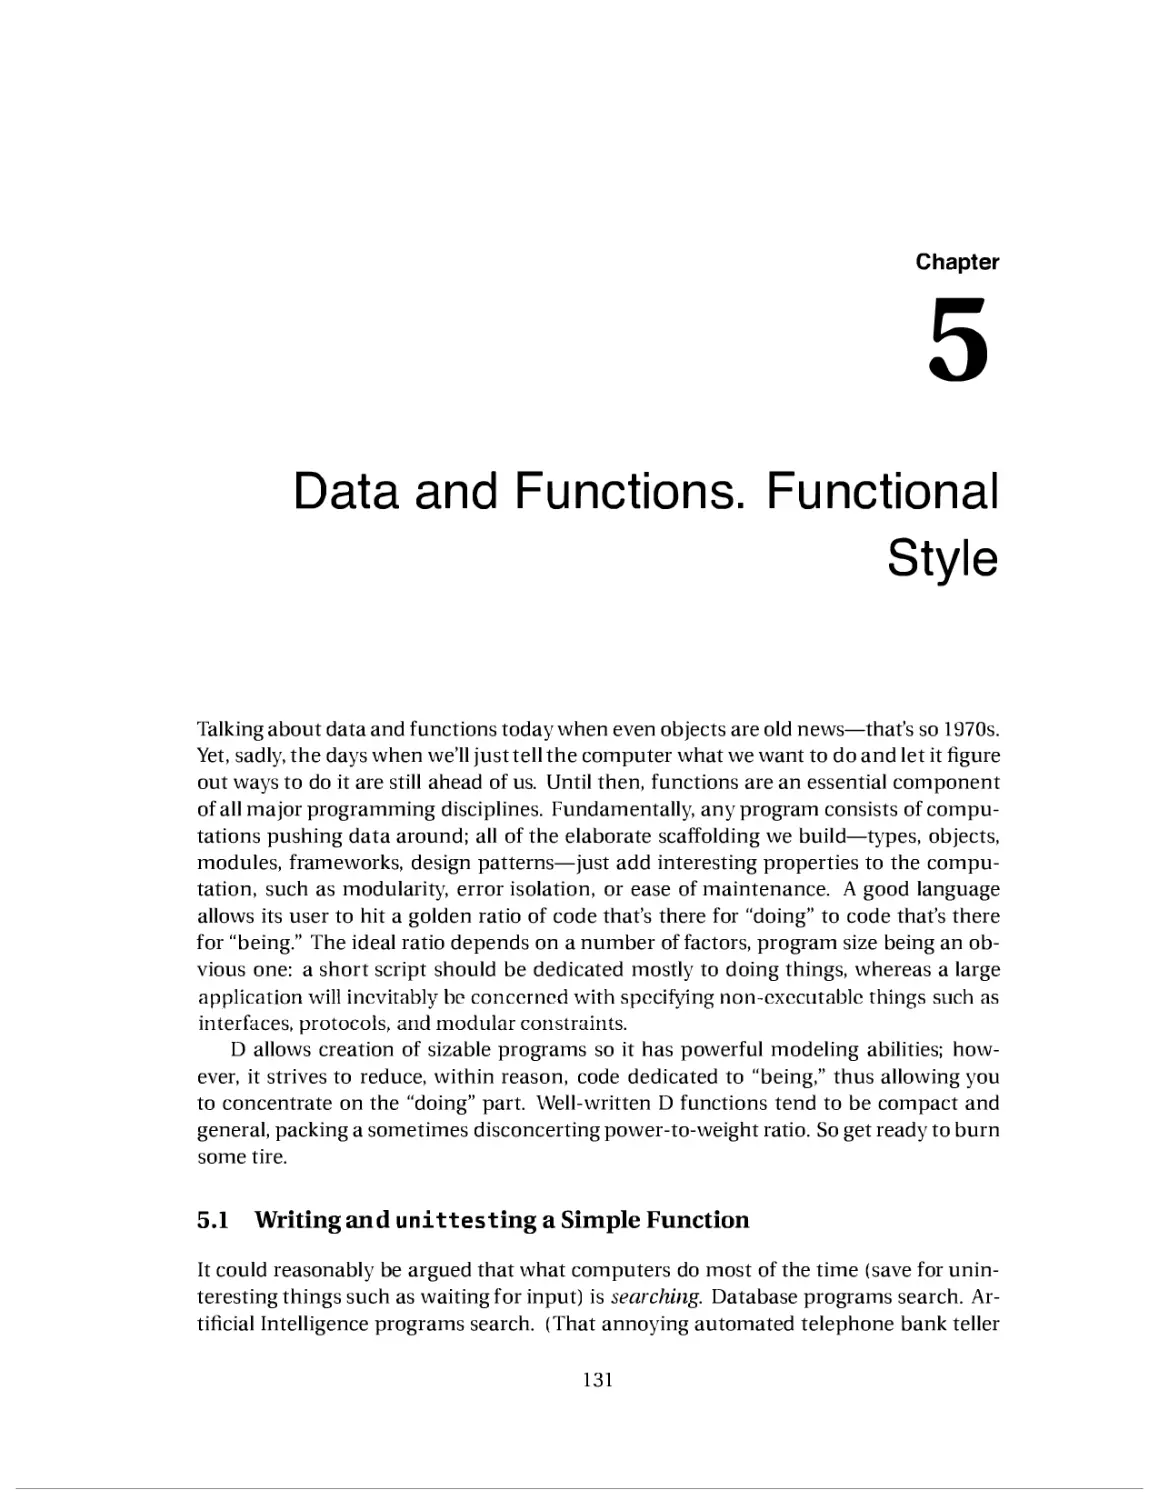 5. Data and Functions. Functional Style